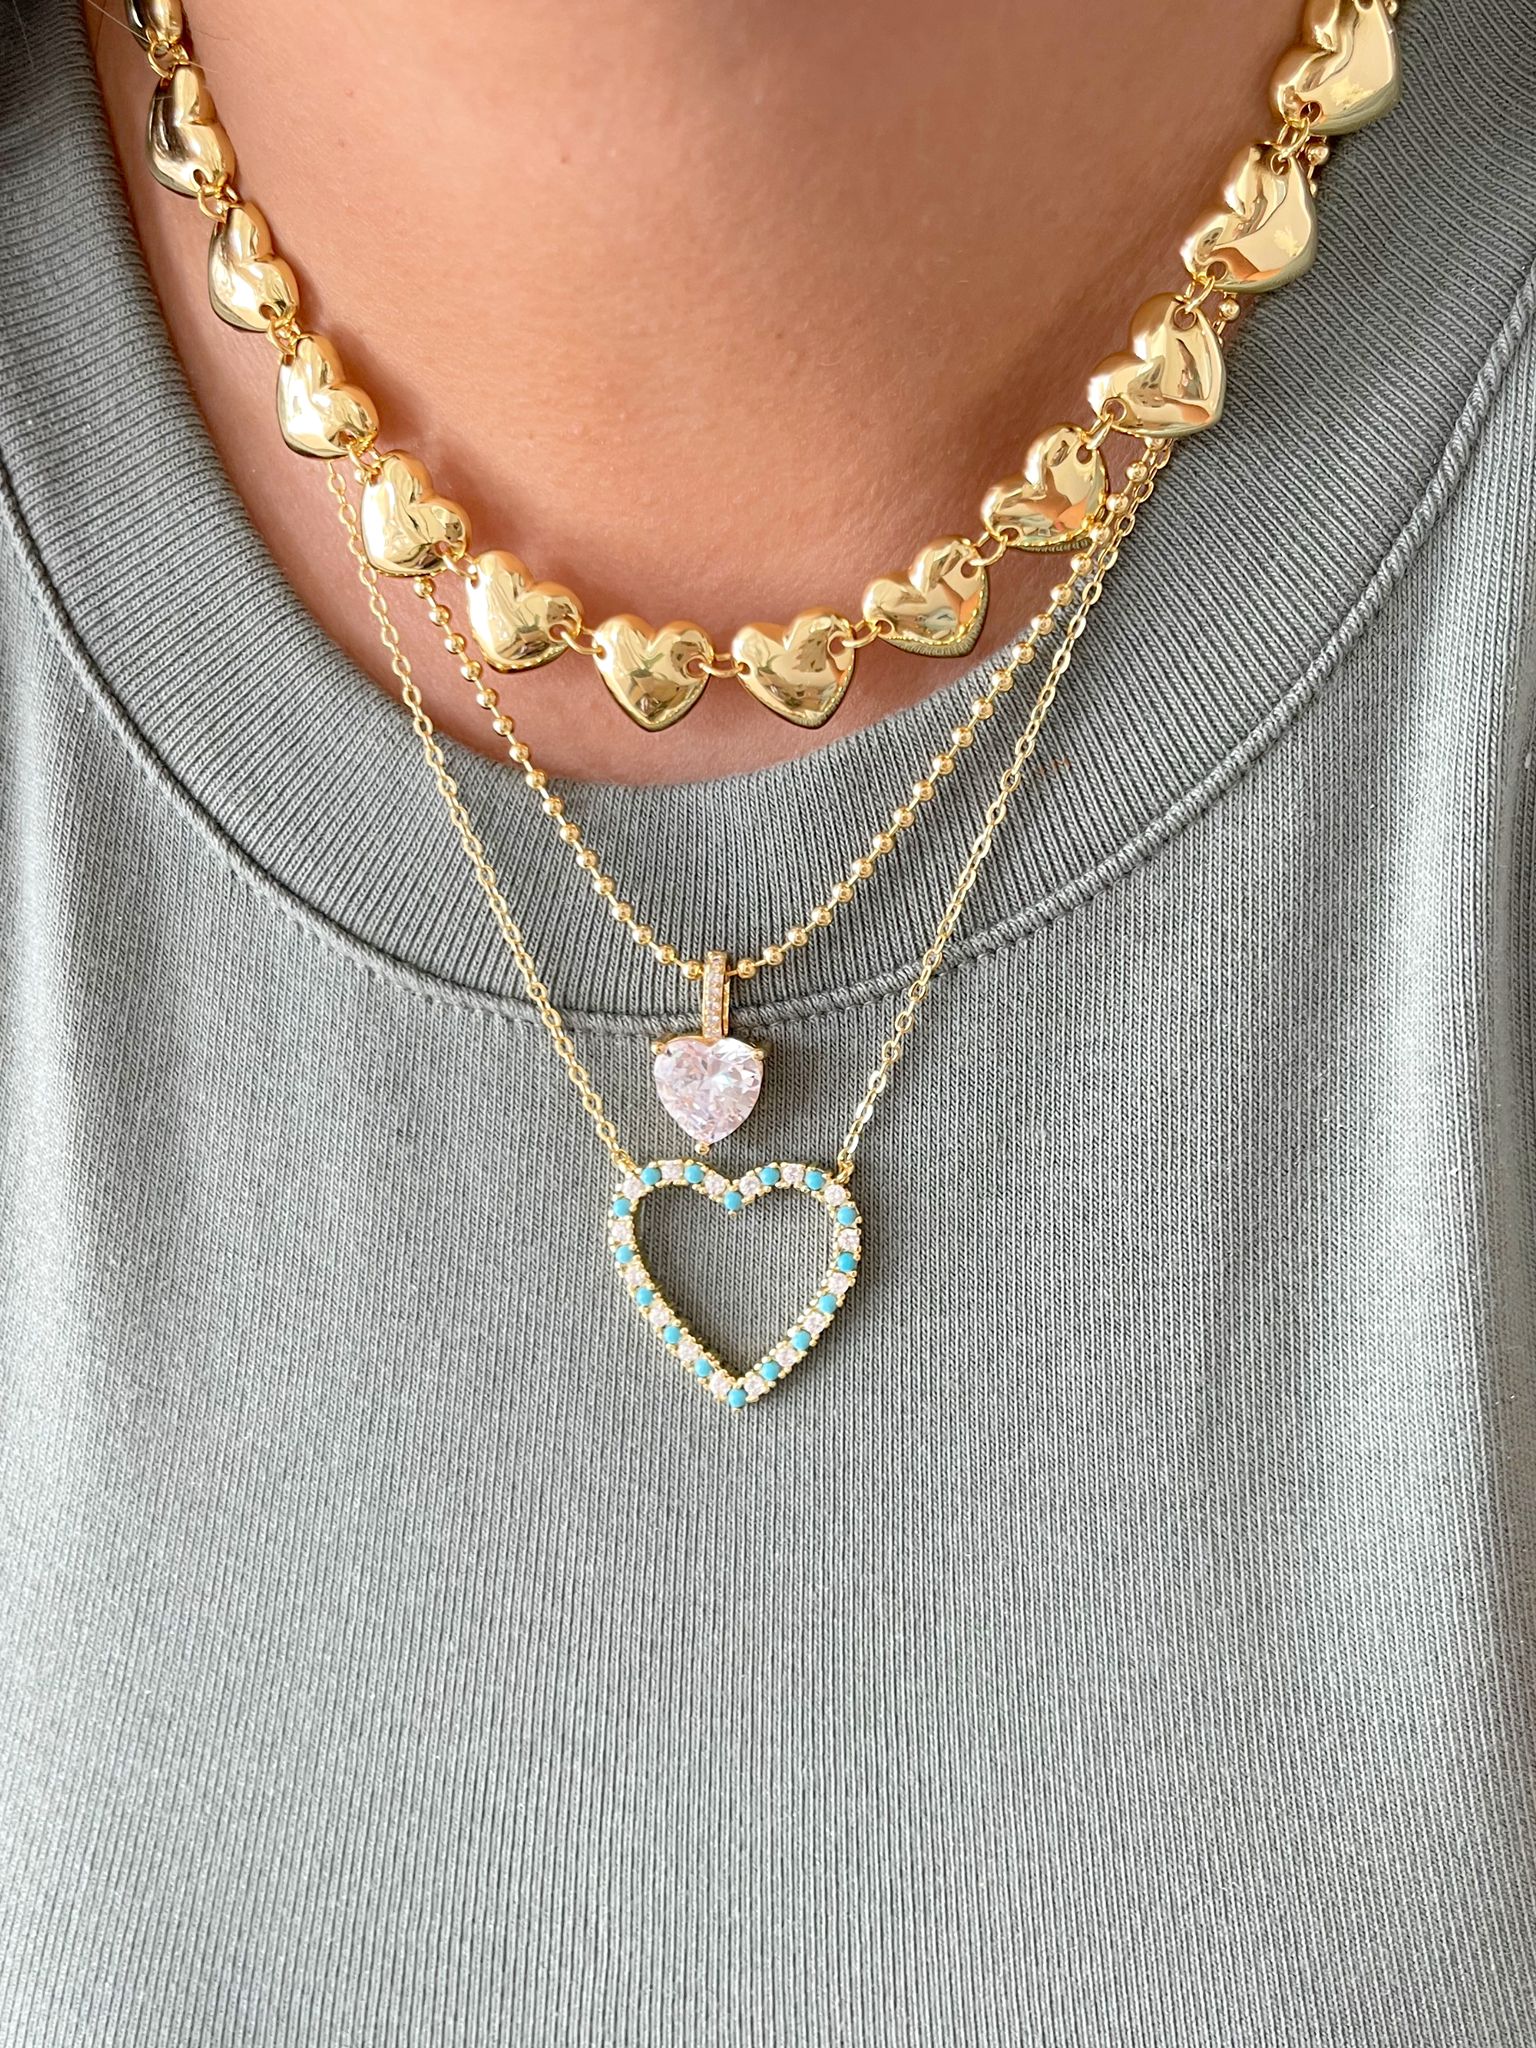 Infinity Love Gold Necklace